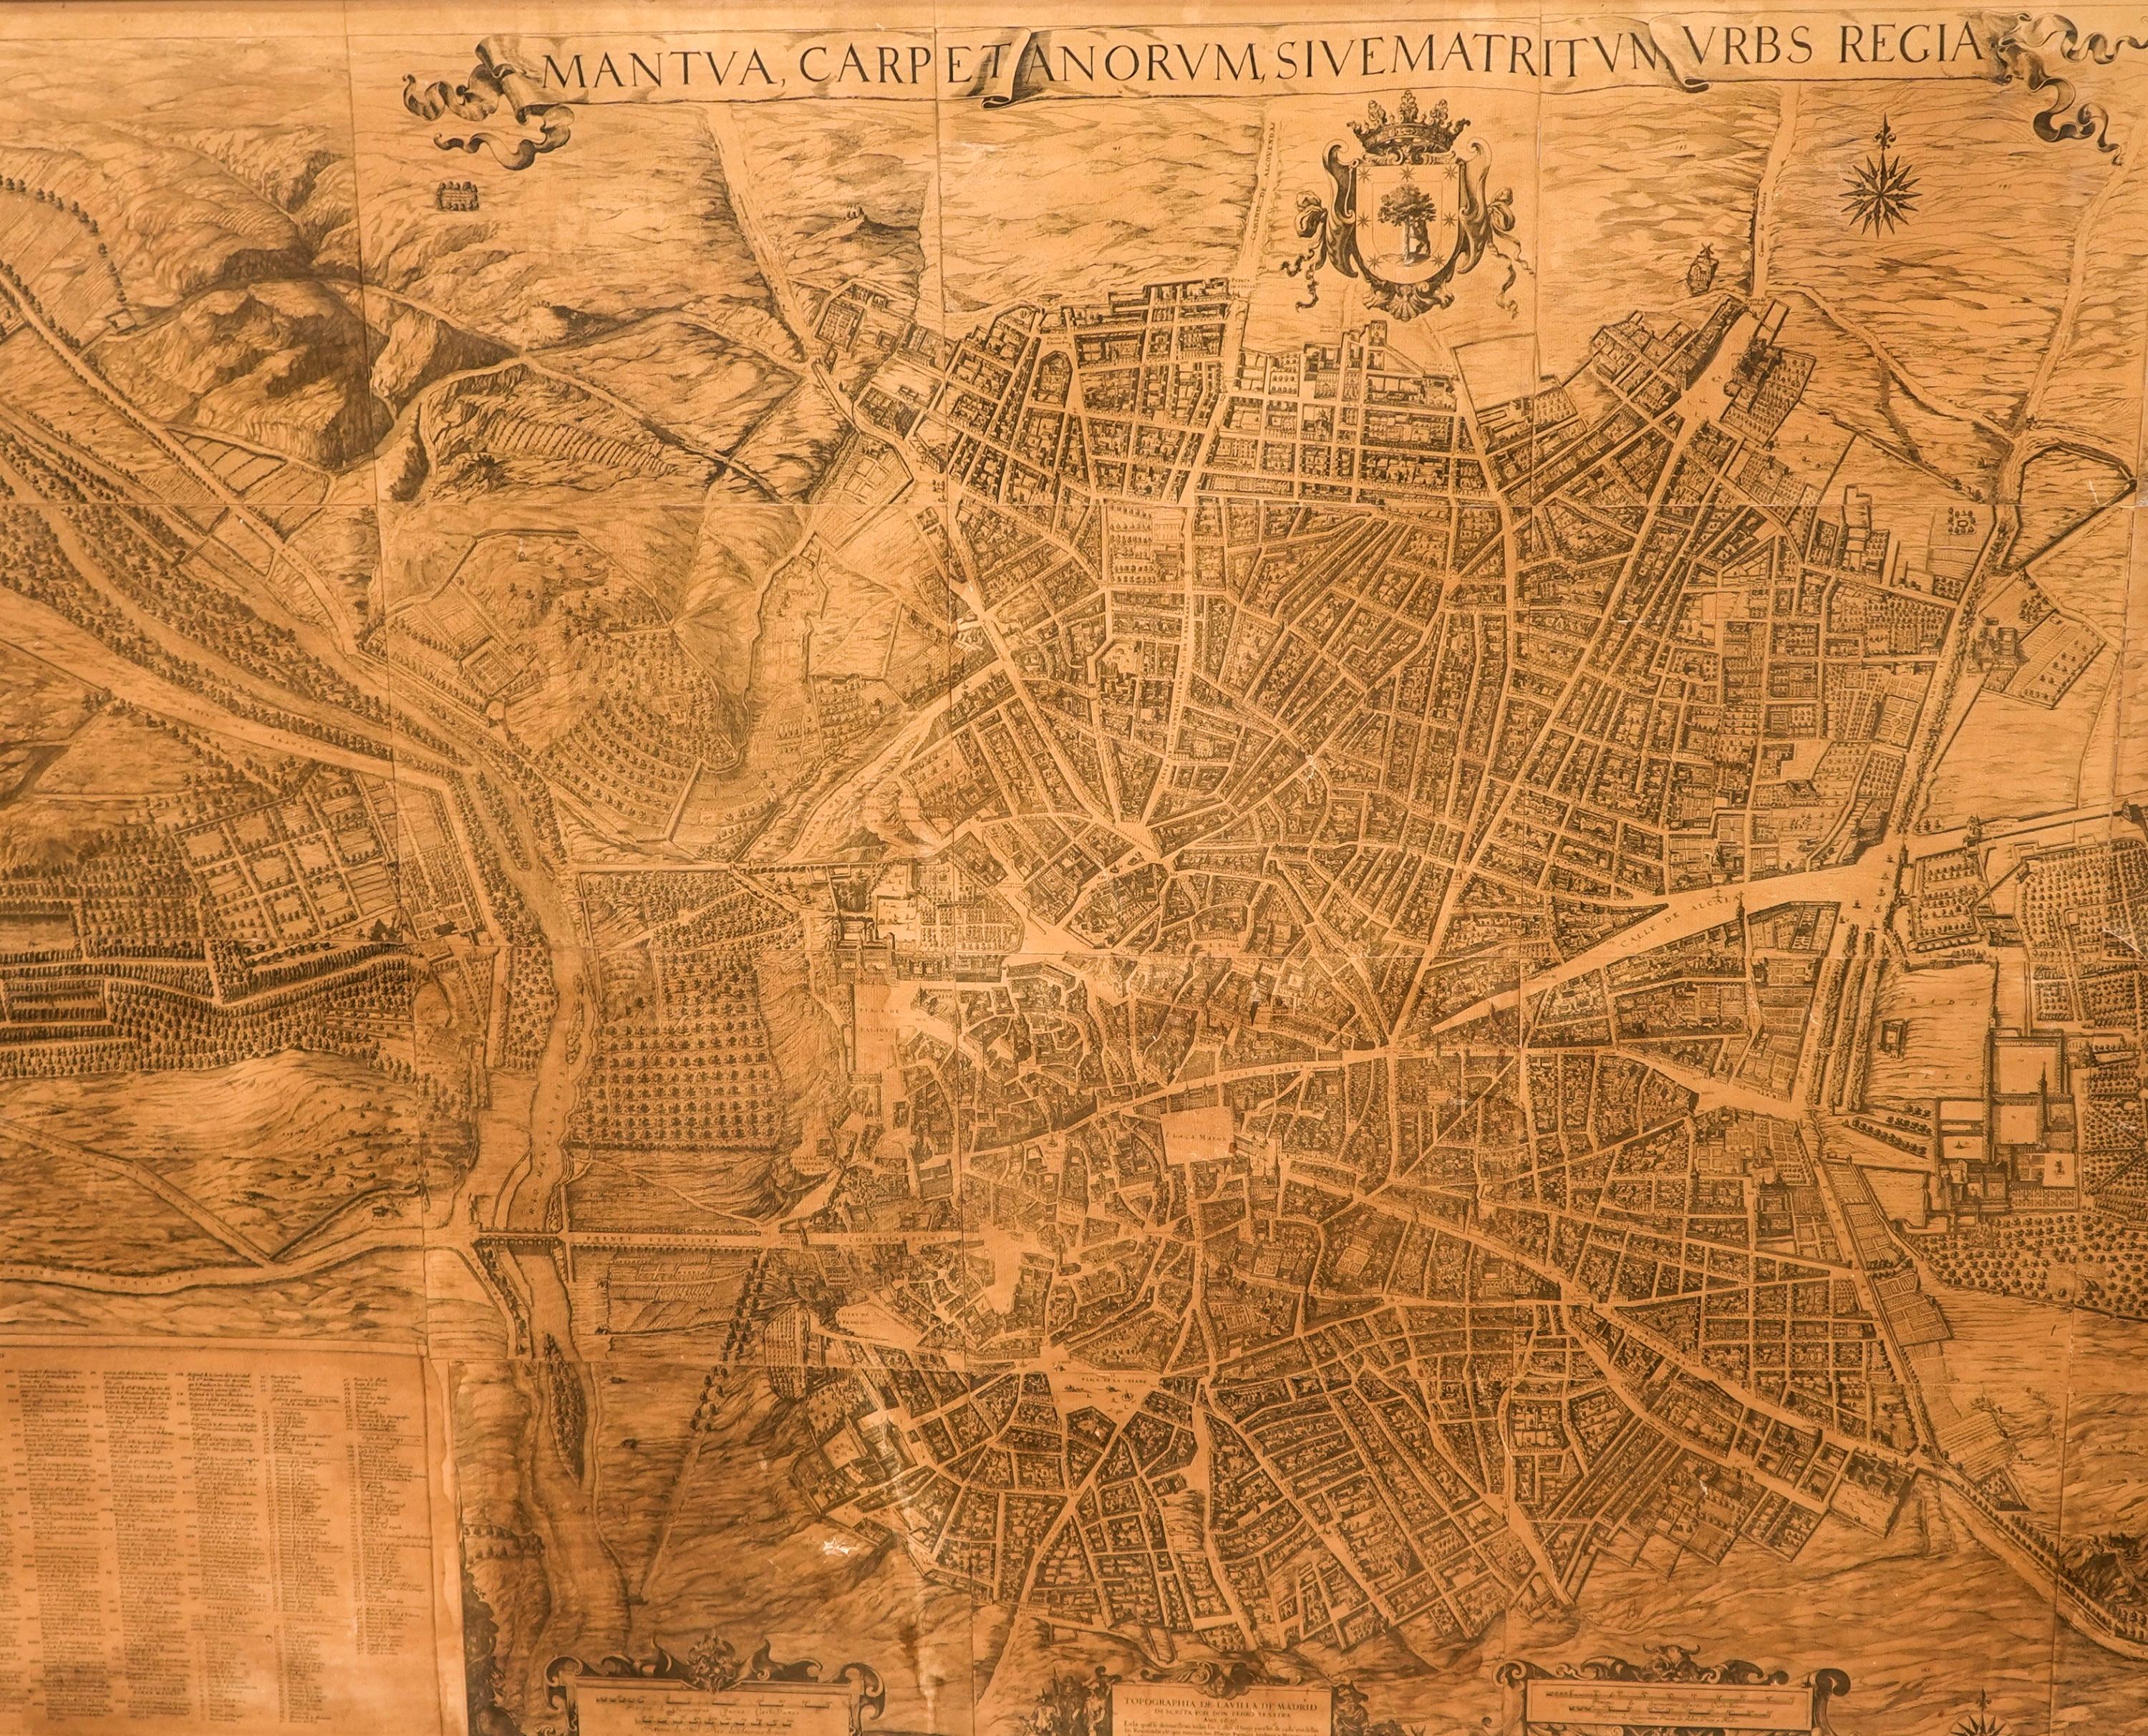 Engraved 1950 Spanish Cartographic Copy of Pedro Texeira Map of Madrid of 17th Century